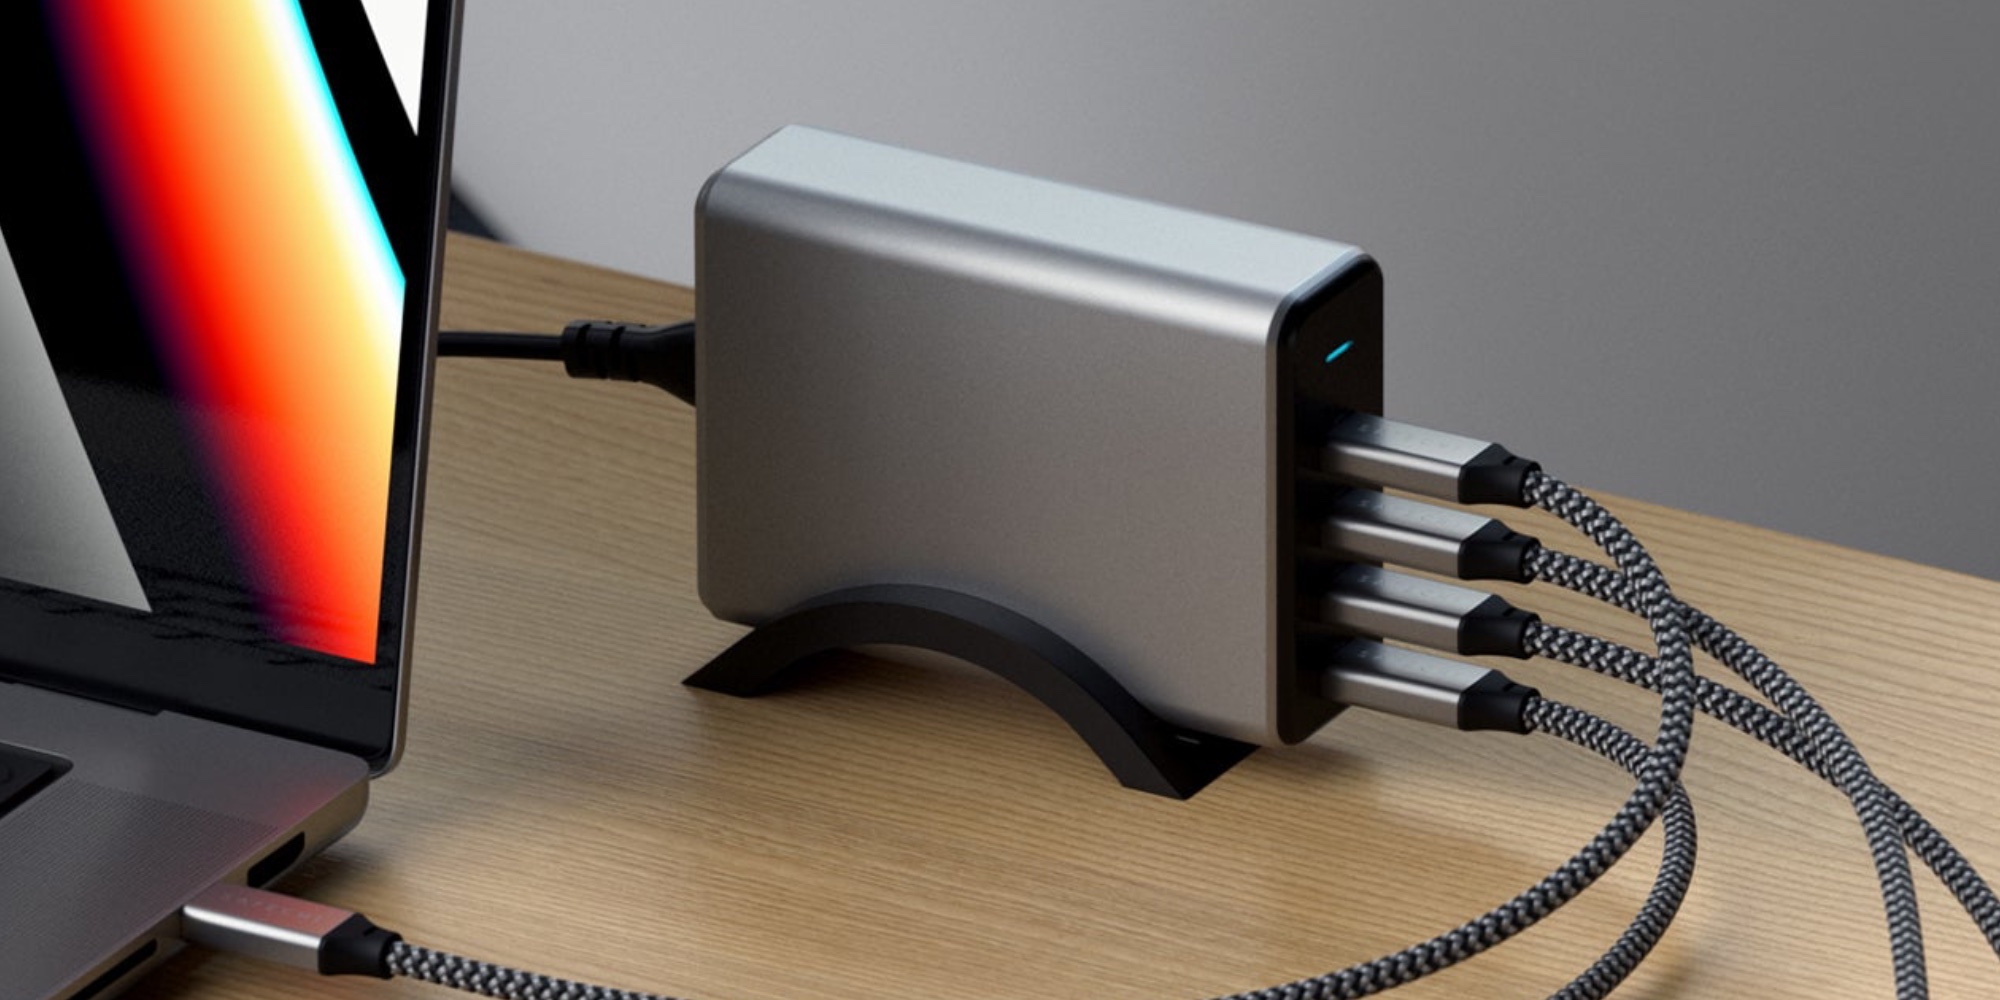 Satechi's new 165W USB-C GaN charger can refuel your entire Apple